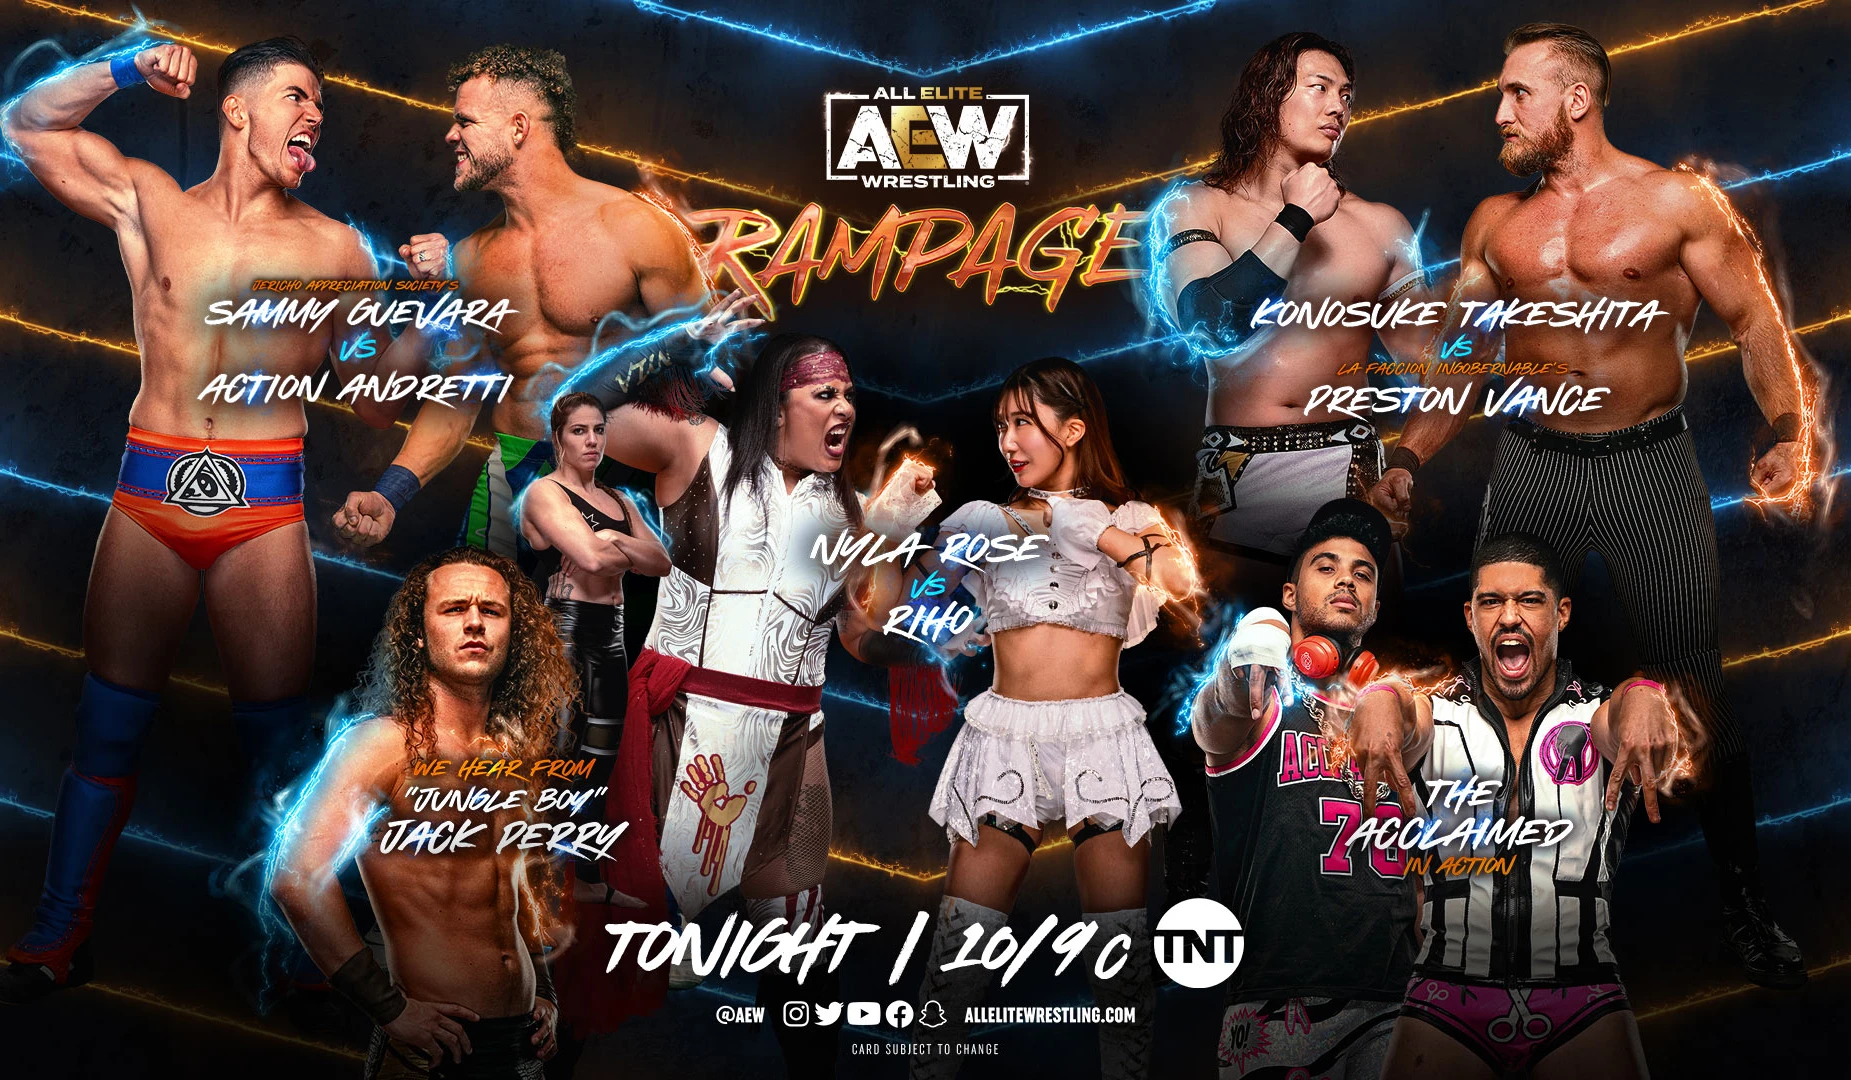 AEW Rampage Notes: Riho attacked by "The Outcasts", ROH Tag Title Ladder match announced